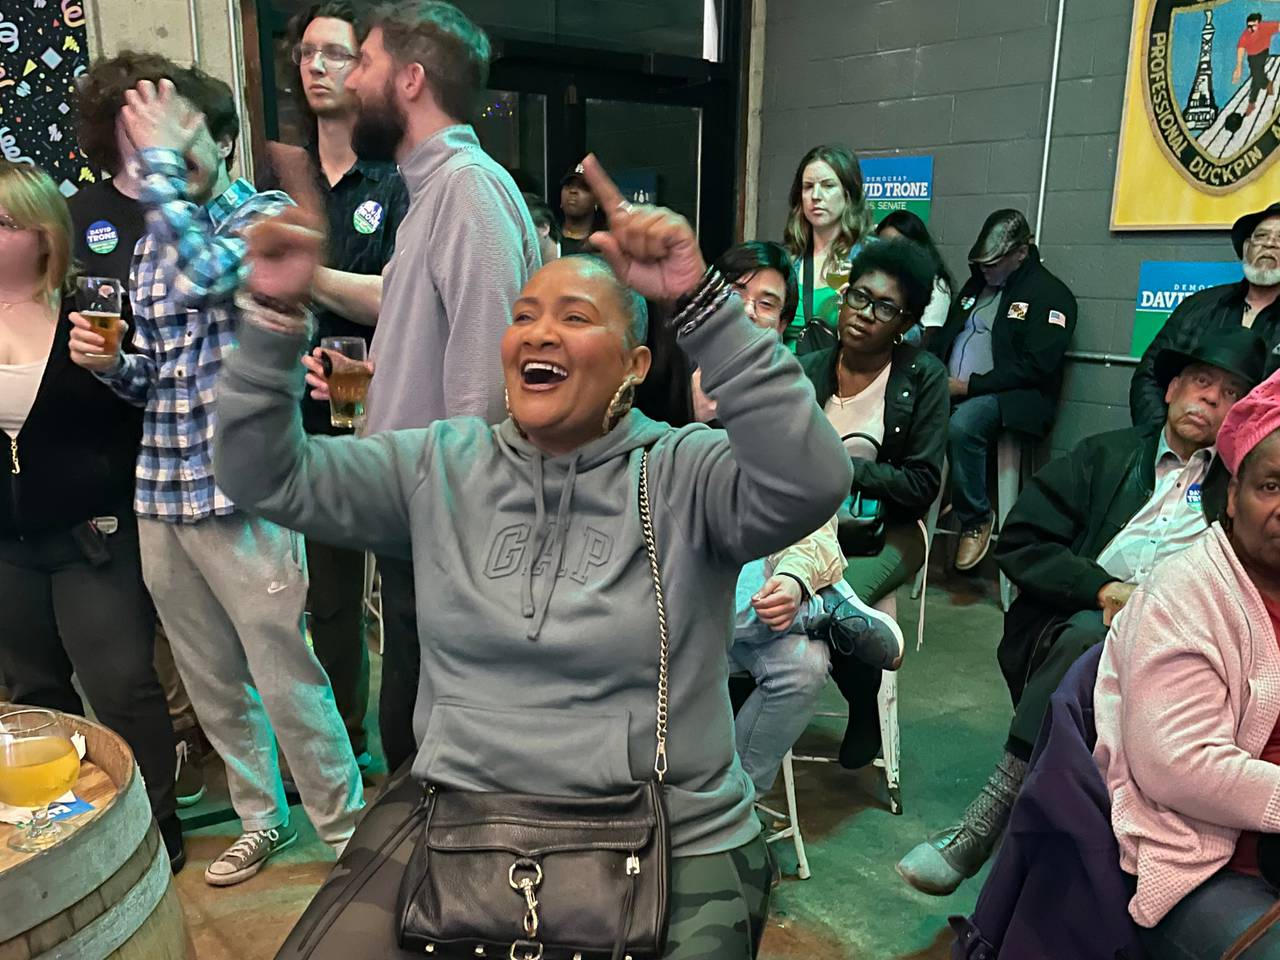 A woman wearing a grey sweatshirt and sitting on a stool in a brewery smiles and raises her arms above her head while watching a debate.